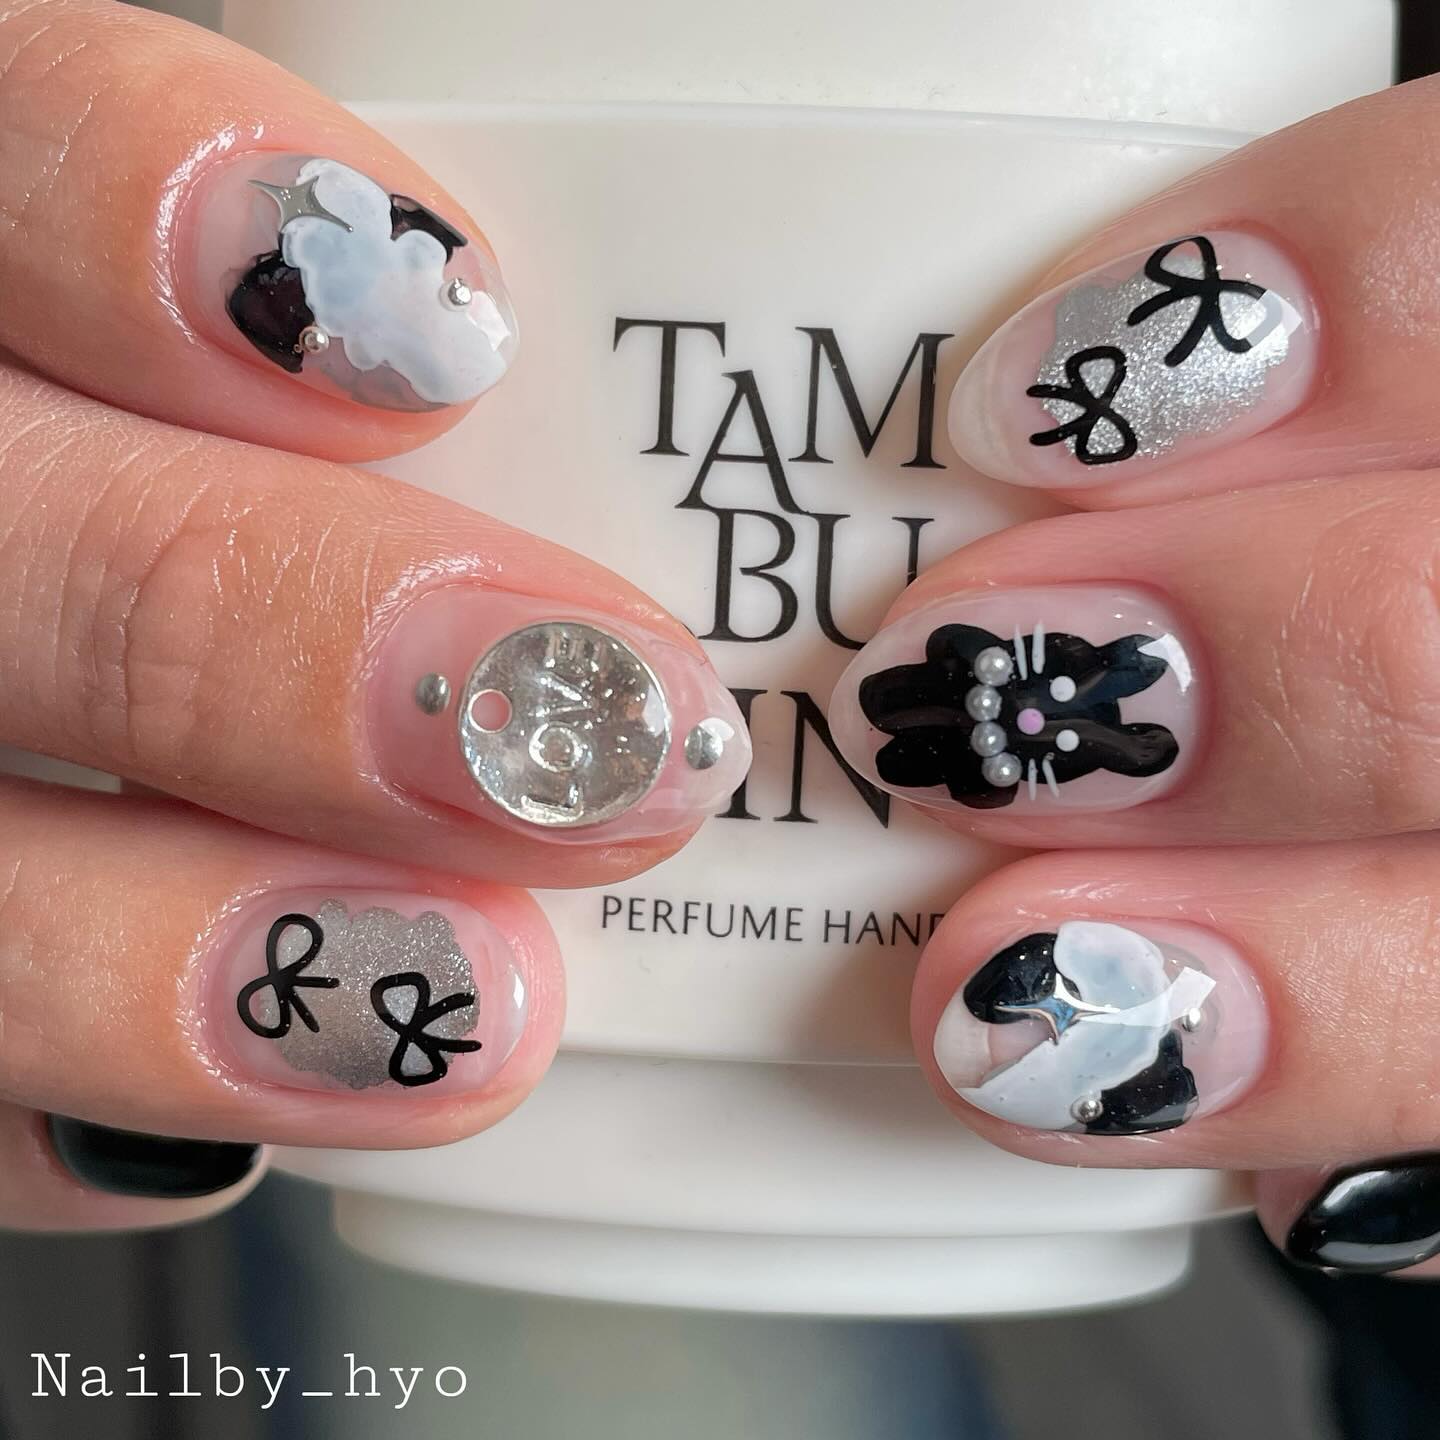 Chic Monochrome Ampersand Nail Art with Gems